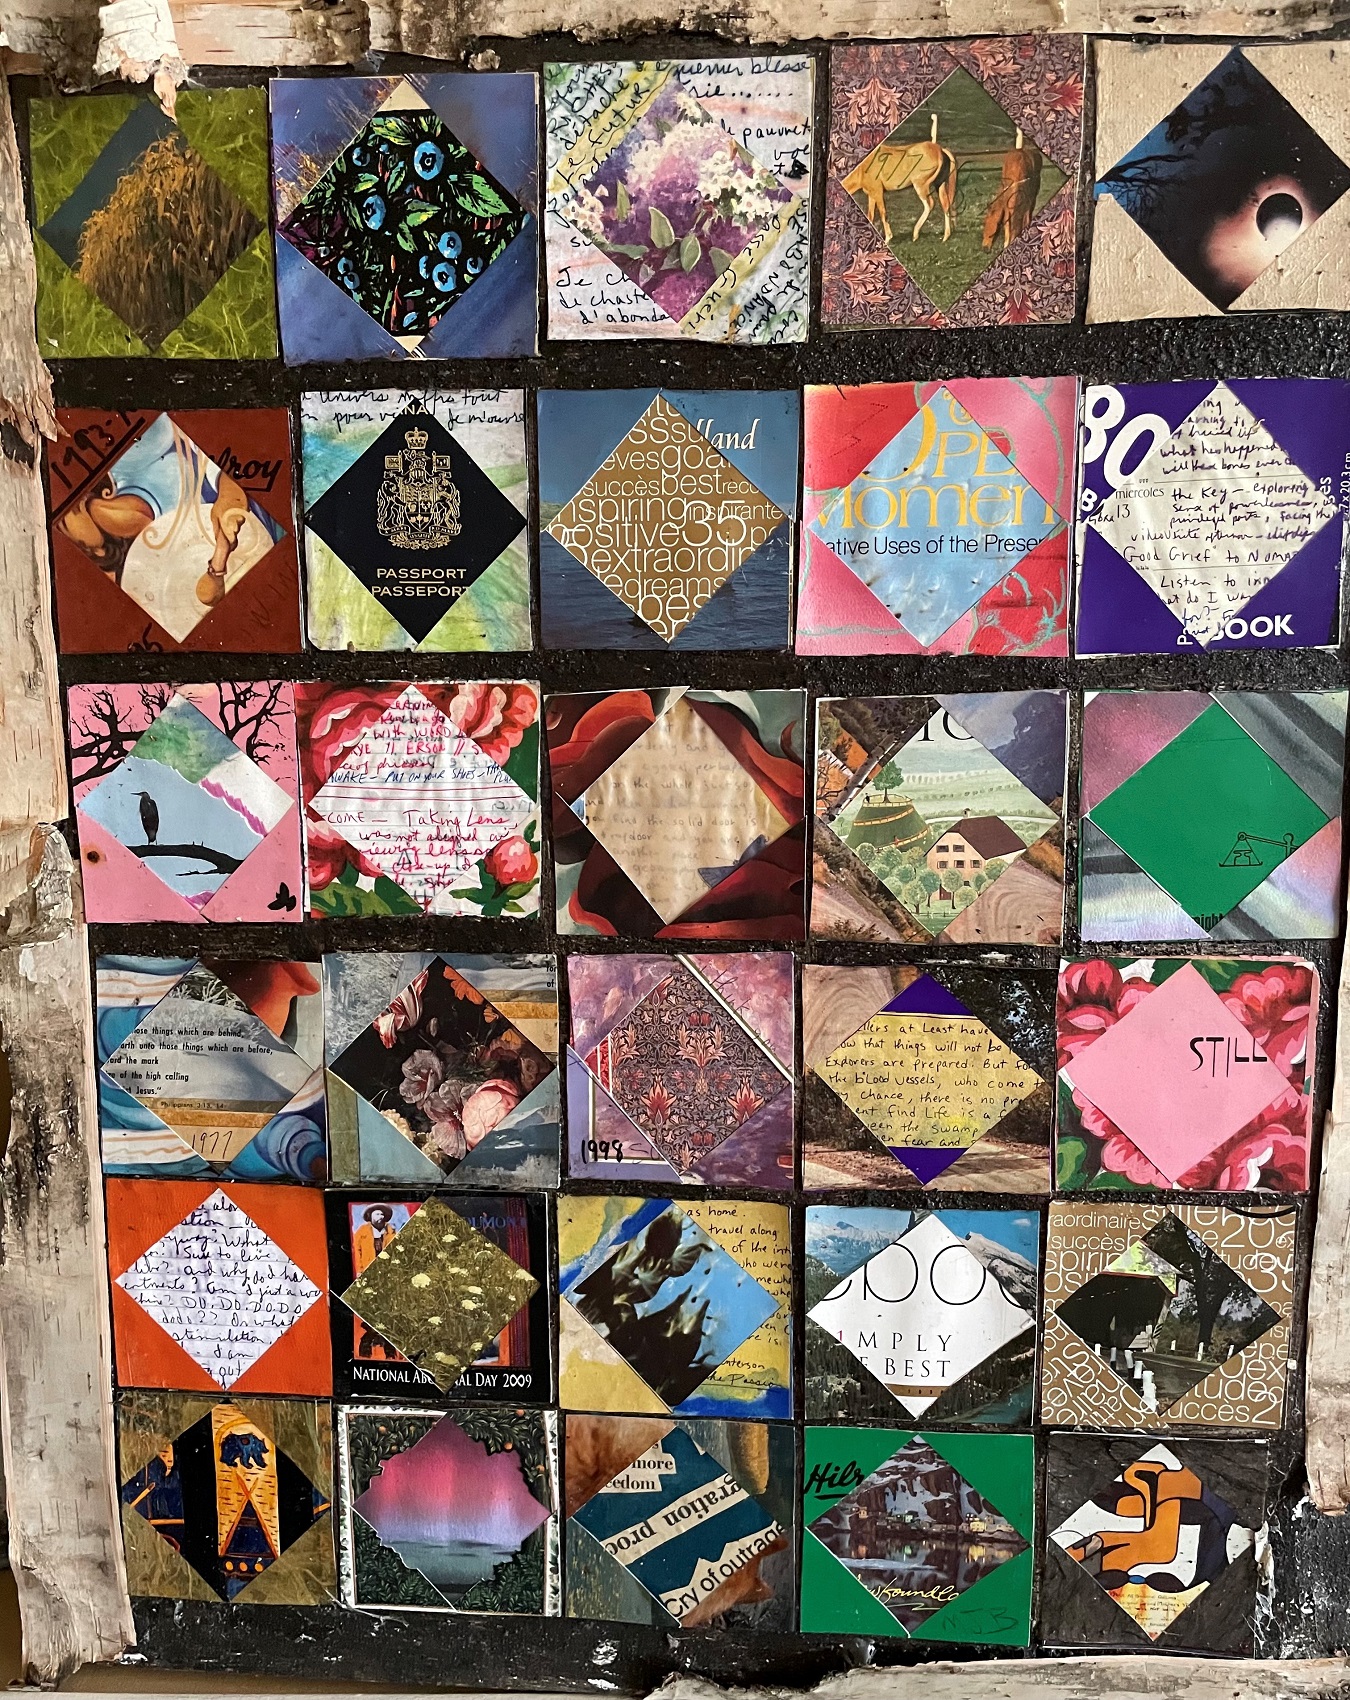 A multi-coloured patchwork quilt made by Marjorie Beaucage.